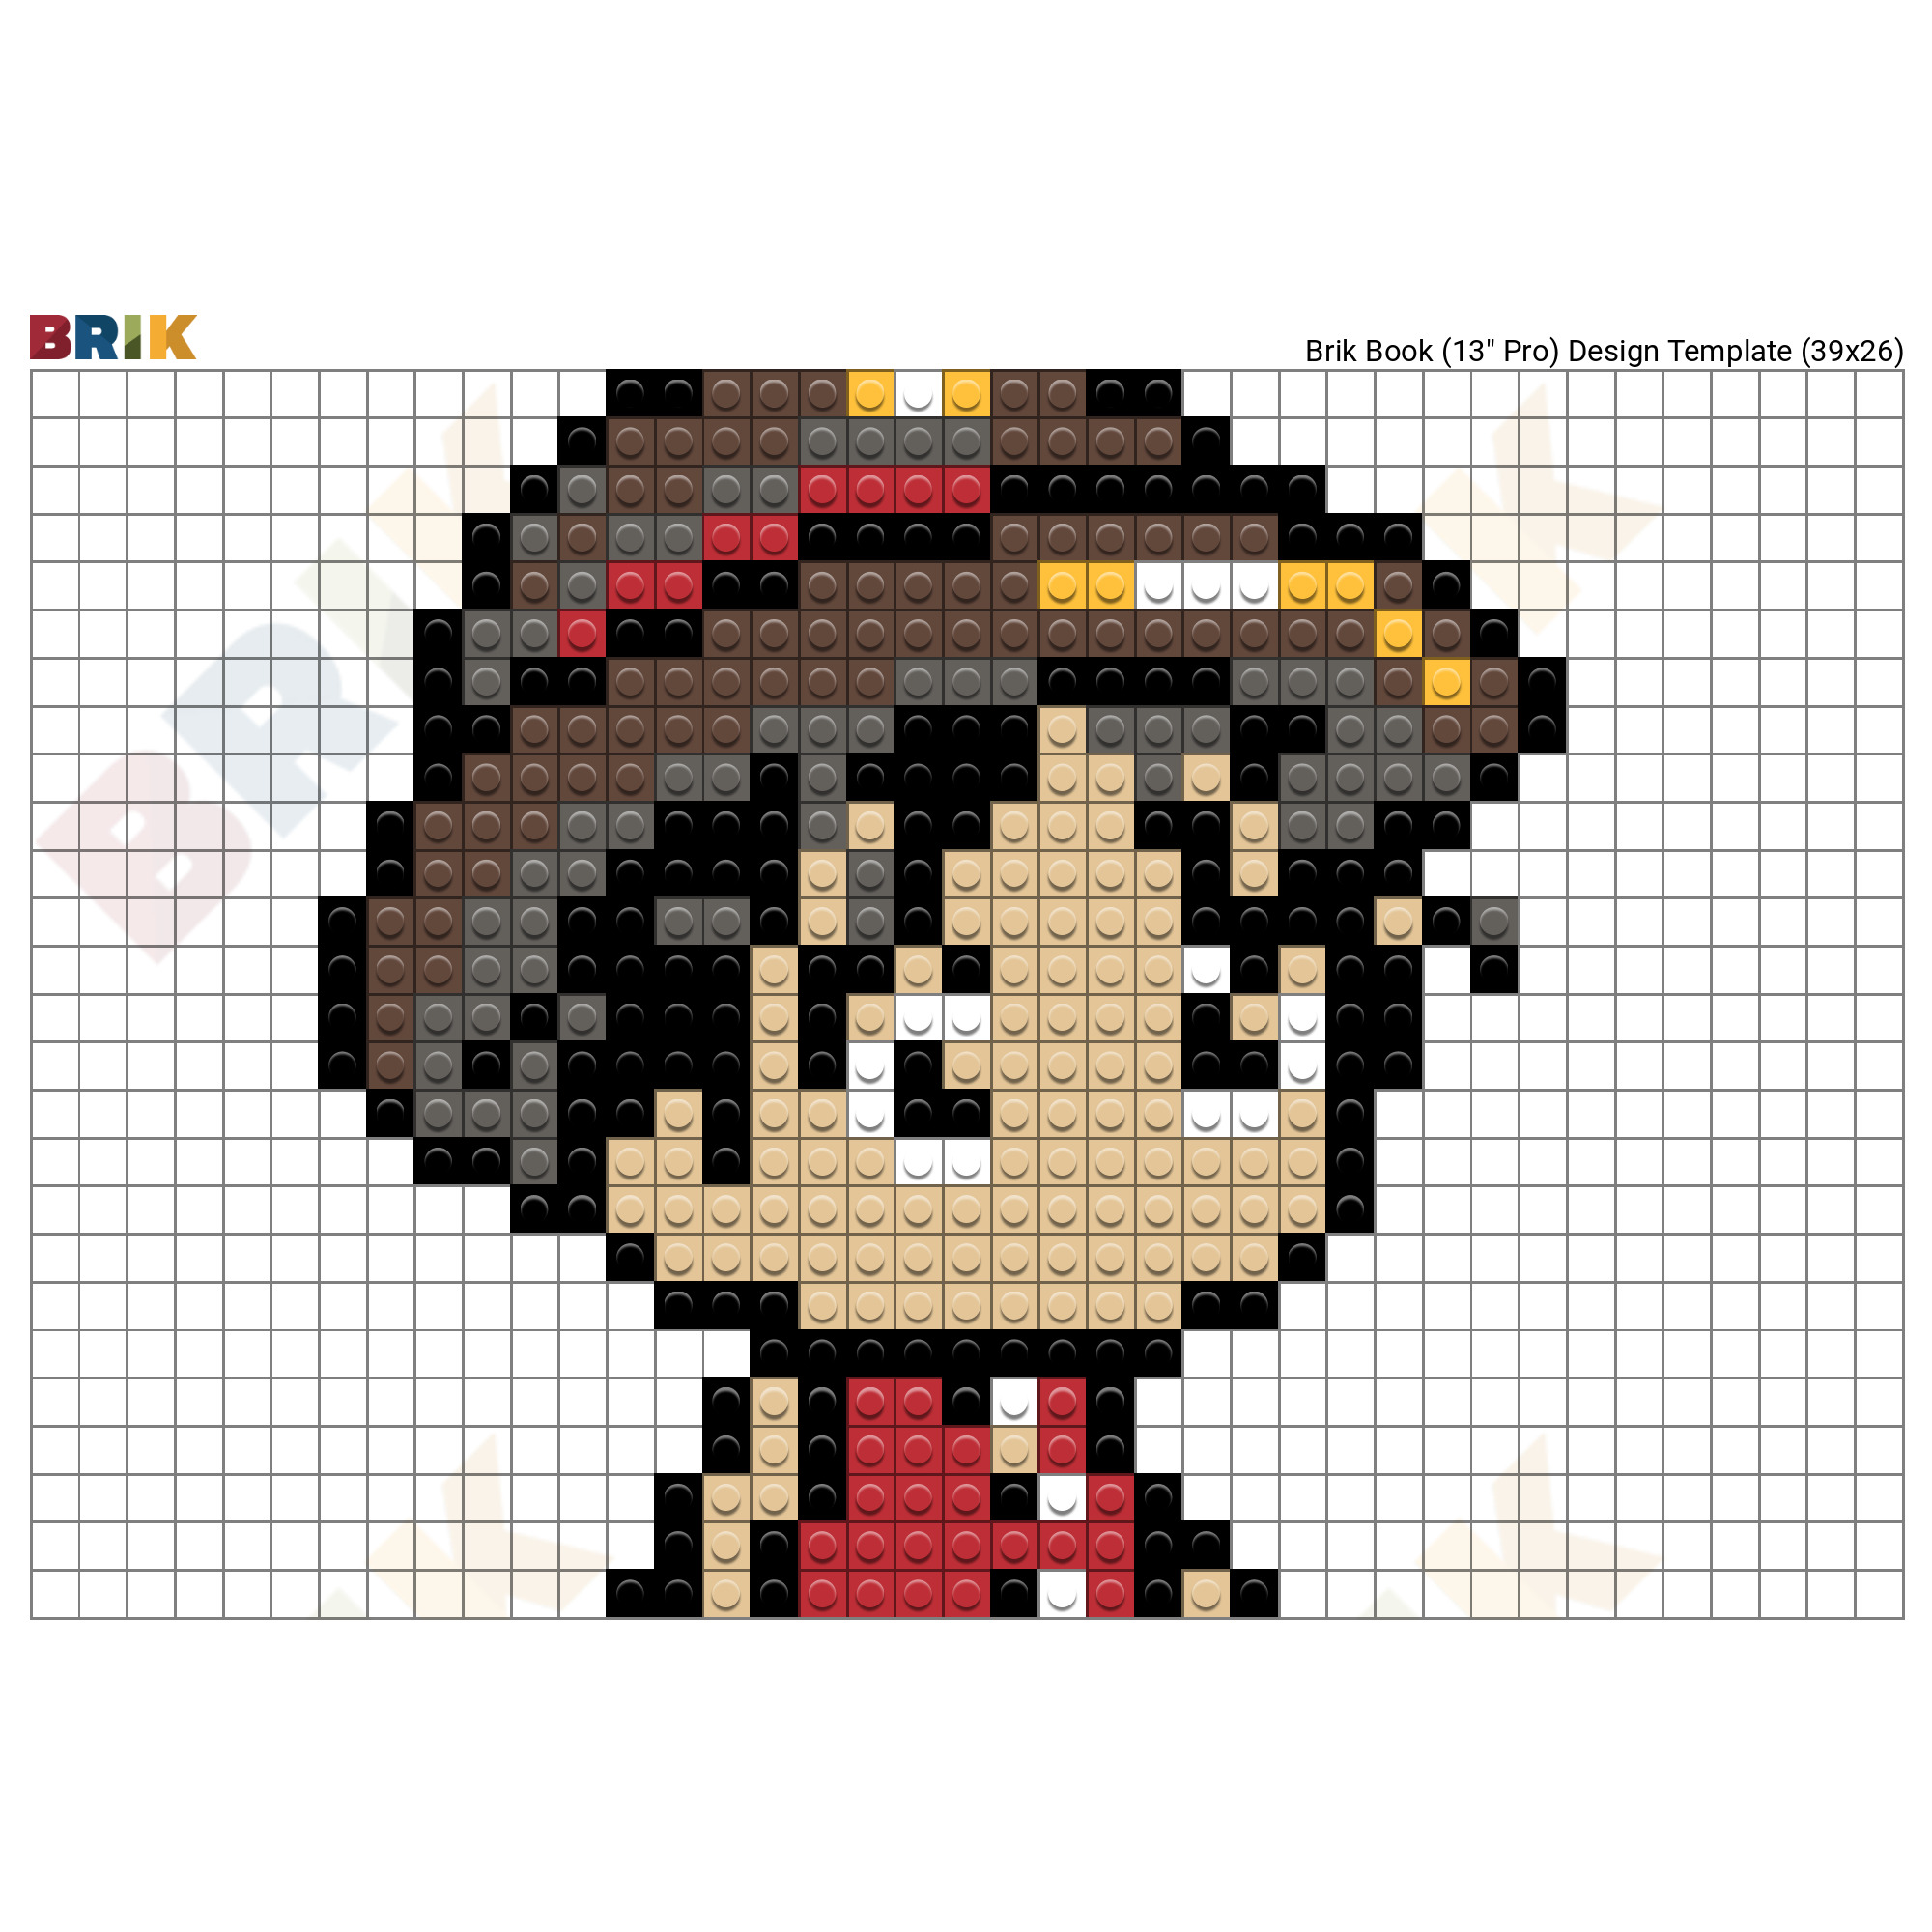 Details 89+ pixelated anime characters - in.cdgdbentre